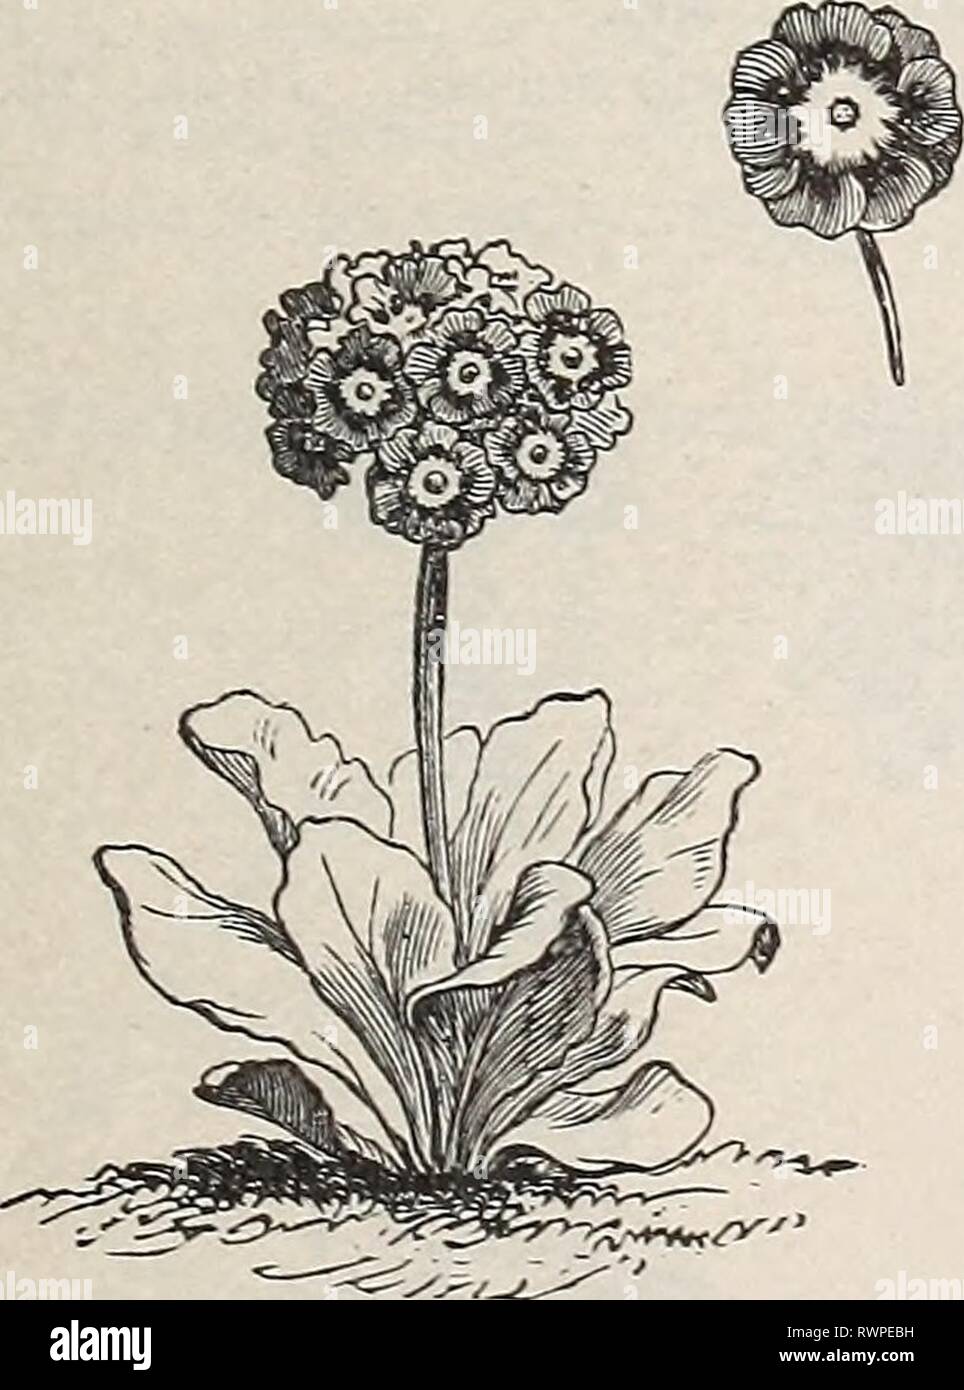 Ellwanger & Barry's general catalogue Ellwanger & Barry's general catalogue : Mount Hope nurseries ellwangerbarrysg1892moun Year: 1892  Phlox SubulatA. P. auricula. All colors mixed. 25c. P. cortusoides. A pretty little plant, six to nine inches hig-h, with lilac flowers. 25c. P. elatior. Ox-LiP Primrose. 25c. P. veris. COWSLIP. Flowers bright yellow in terminal umbels, in spring and early summer. 25c. PULMOXAKIA. Lungwort. P. angustifolia. Fine violet flowers, one foot. April. 25c. P. maculata. Distinct, blotched foliage; a vers* fine border plant. 25e. PYRETHRUM. A most valuable class of har Stock Photo